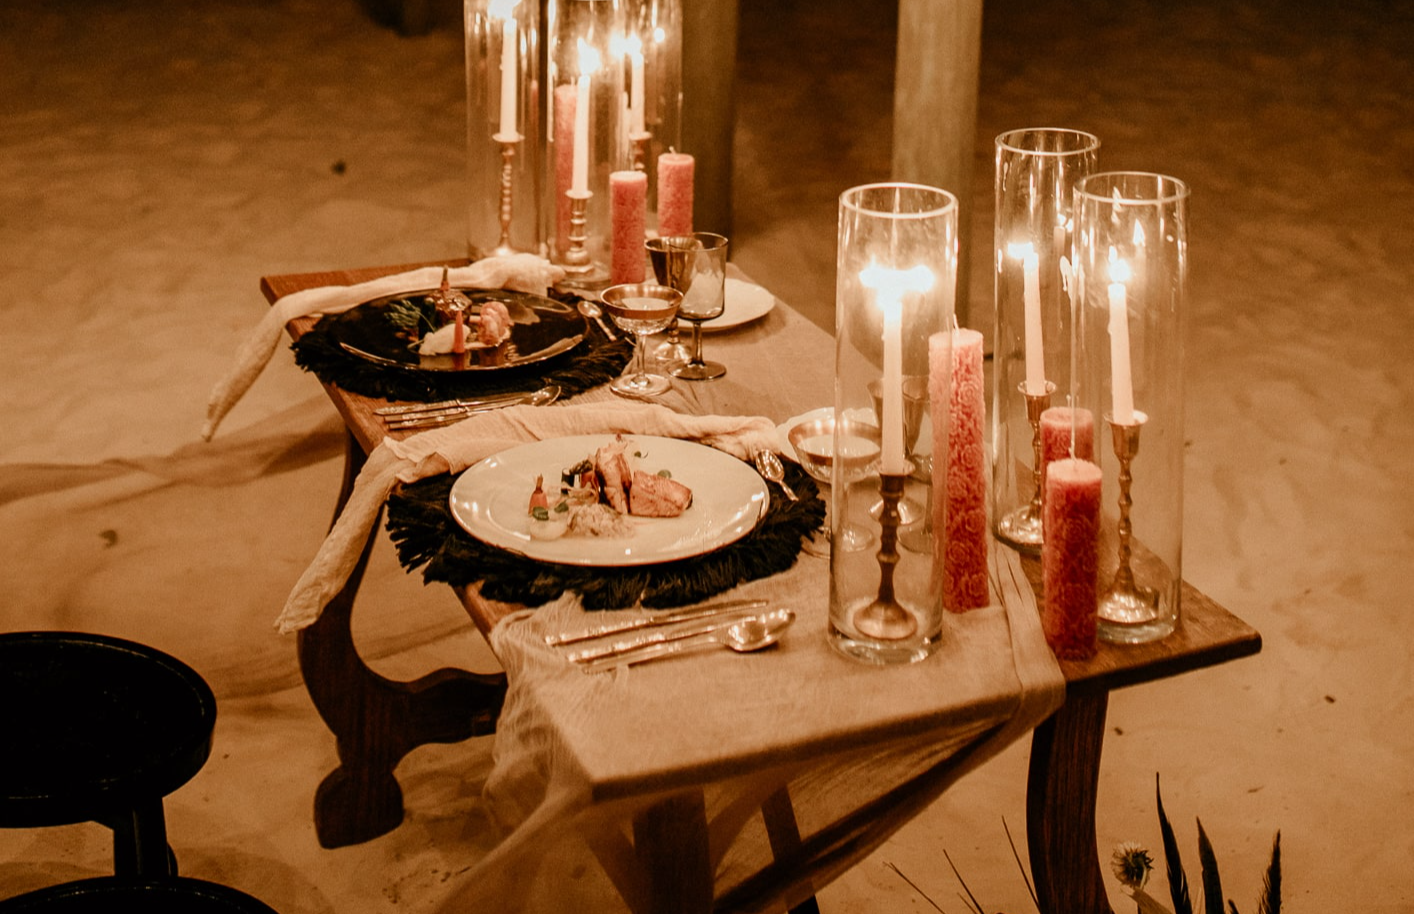 Candlelight dinner at The Explorean Cozumel